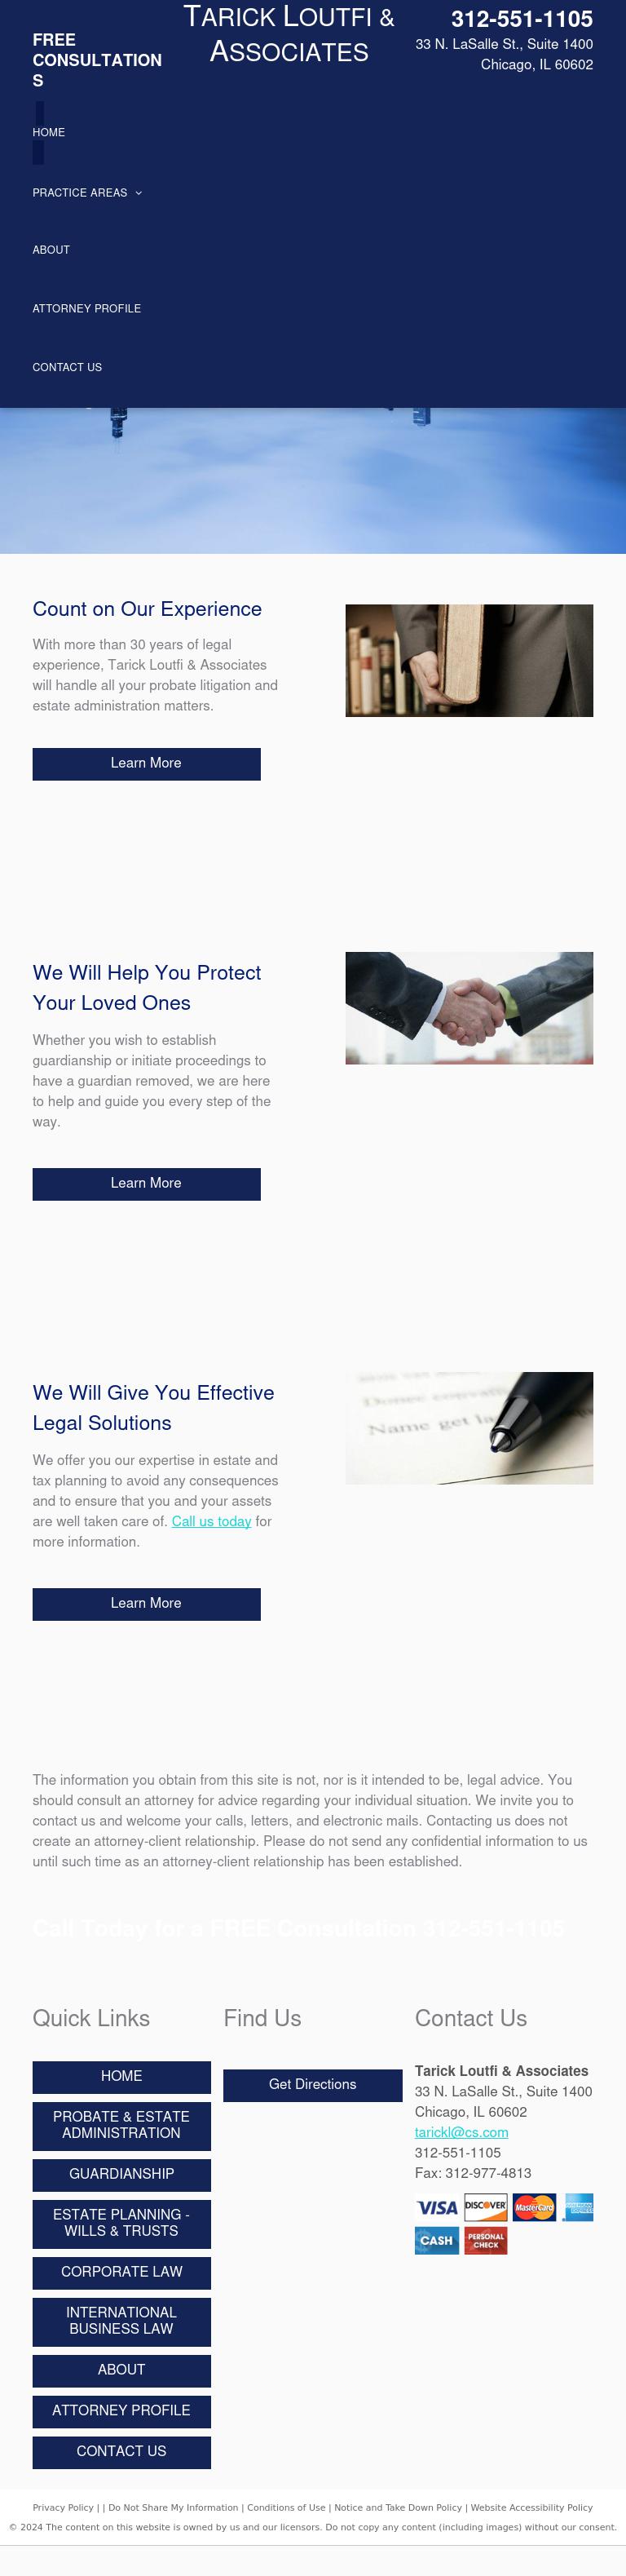 Tarick Loutfi Attorney at Law - Chicago IL Lawyers